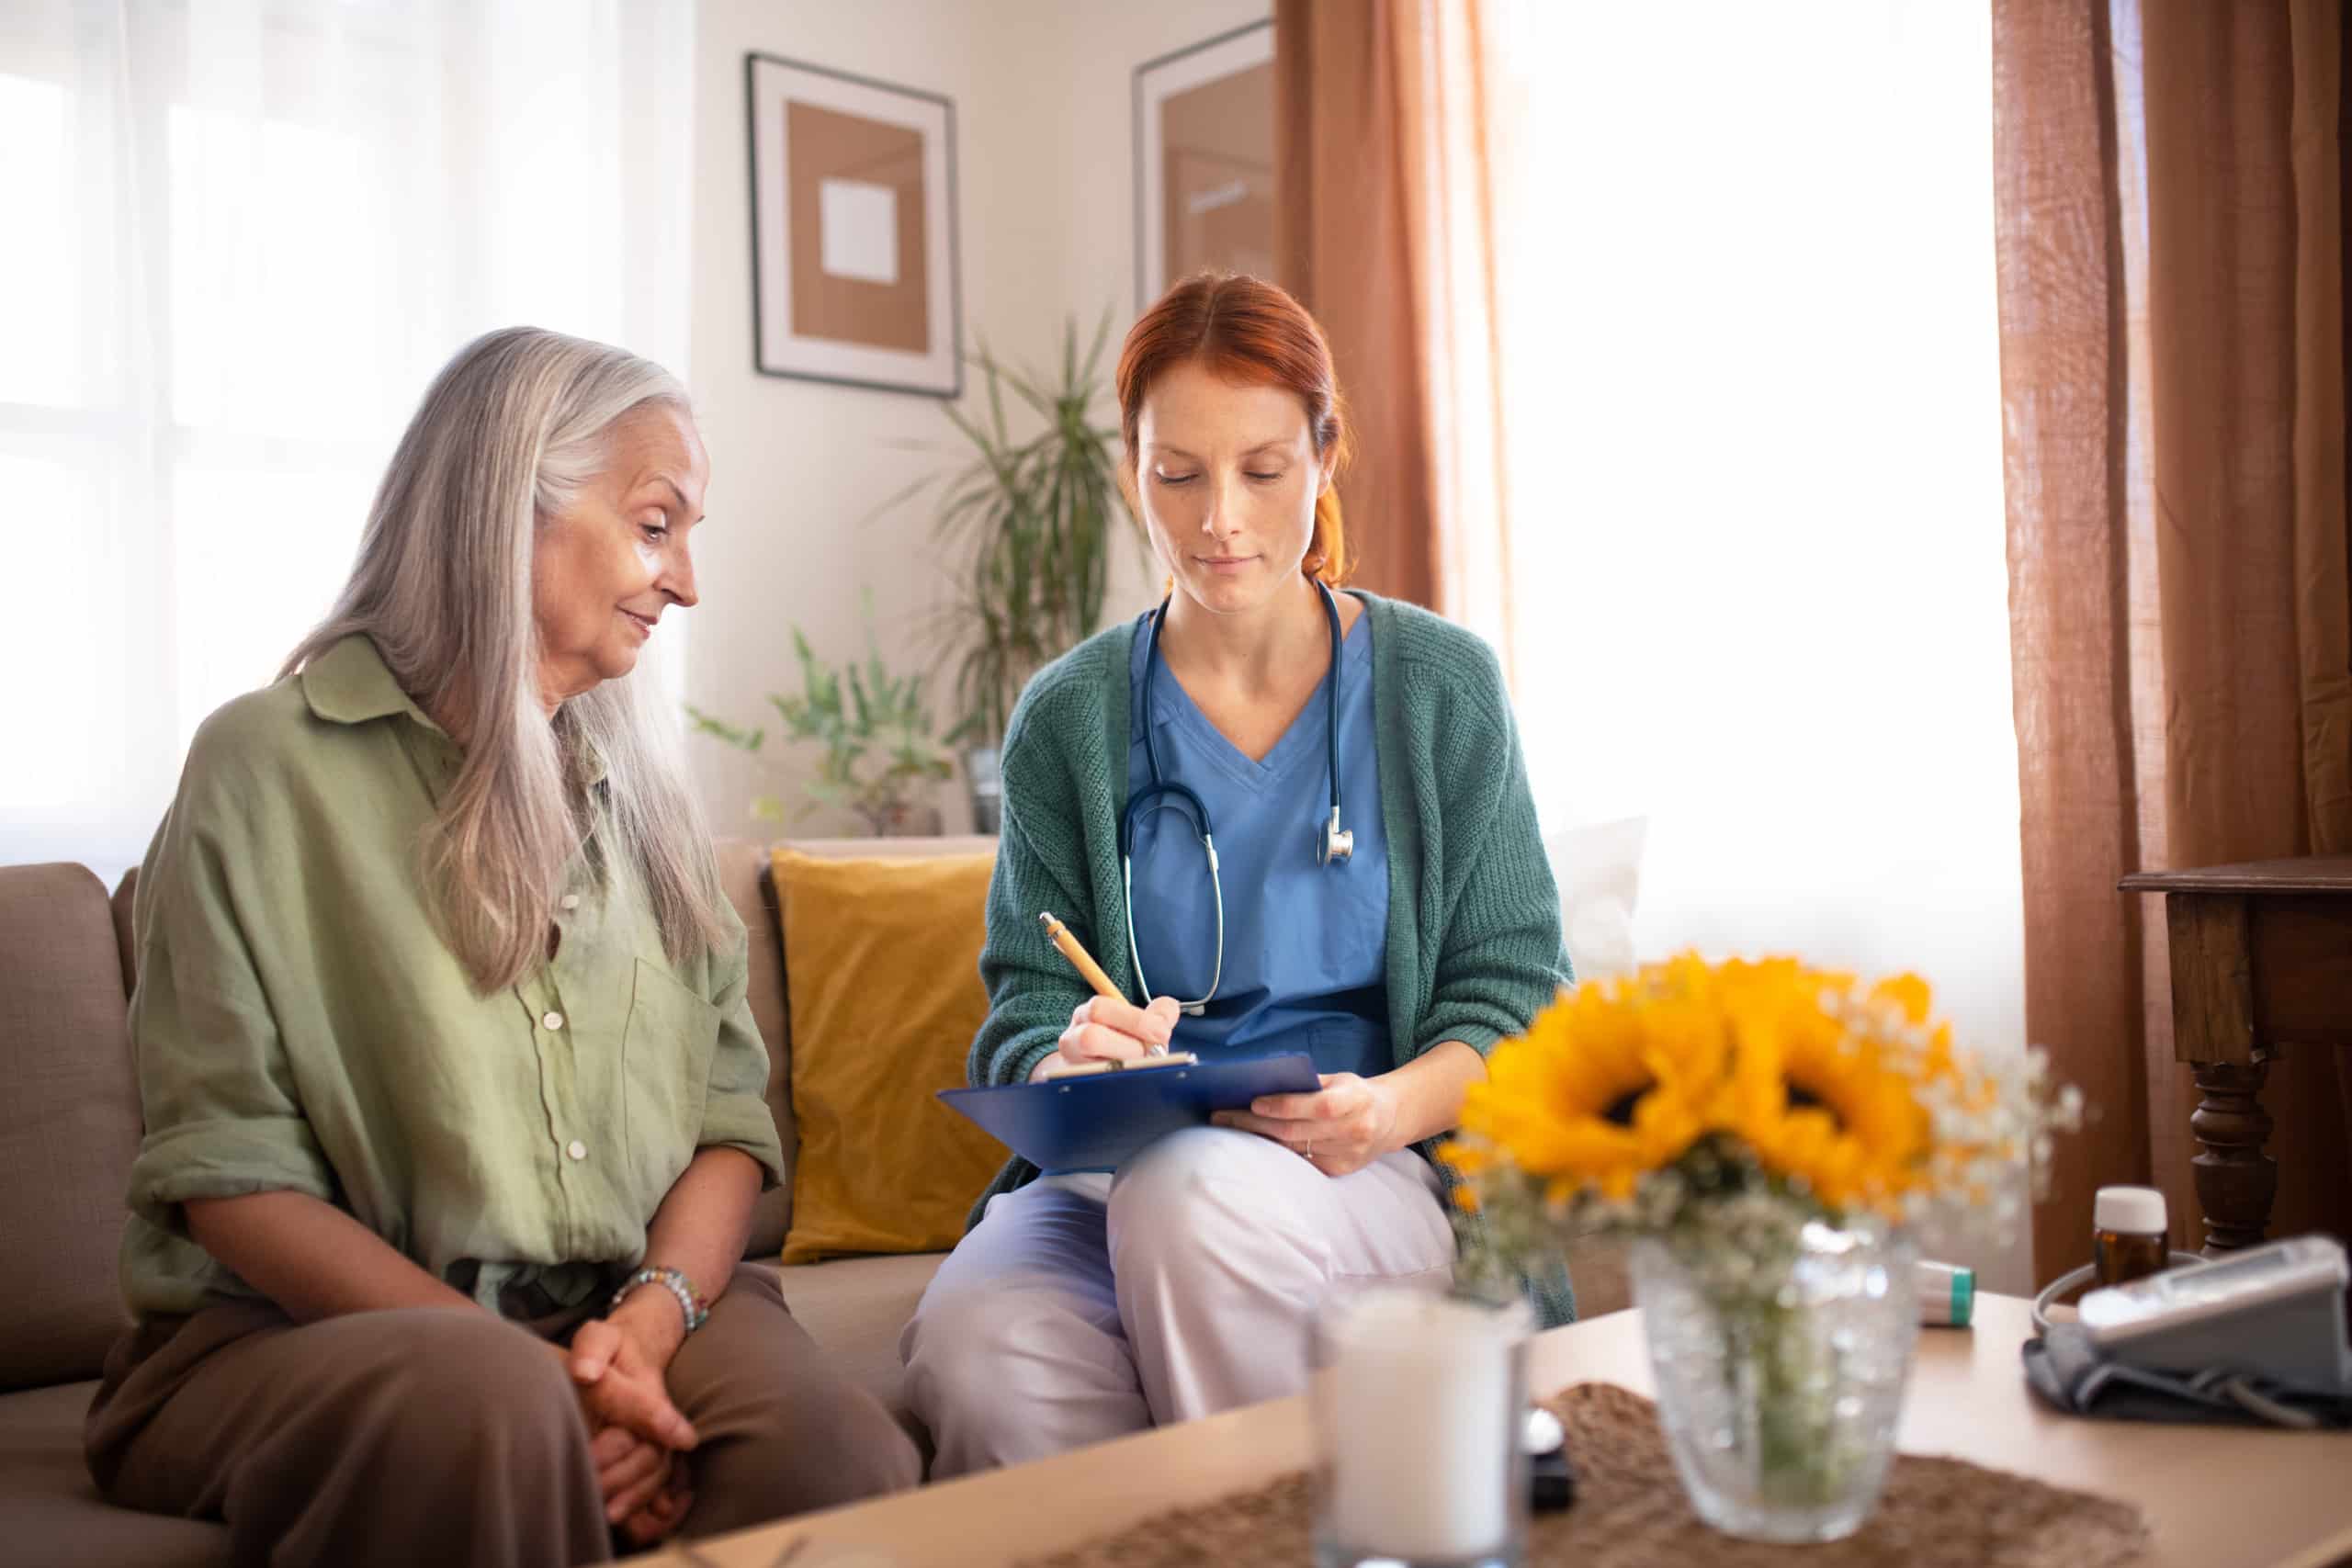 A nurse is discussing health insurance benefits with an older woman in a living room.